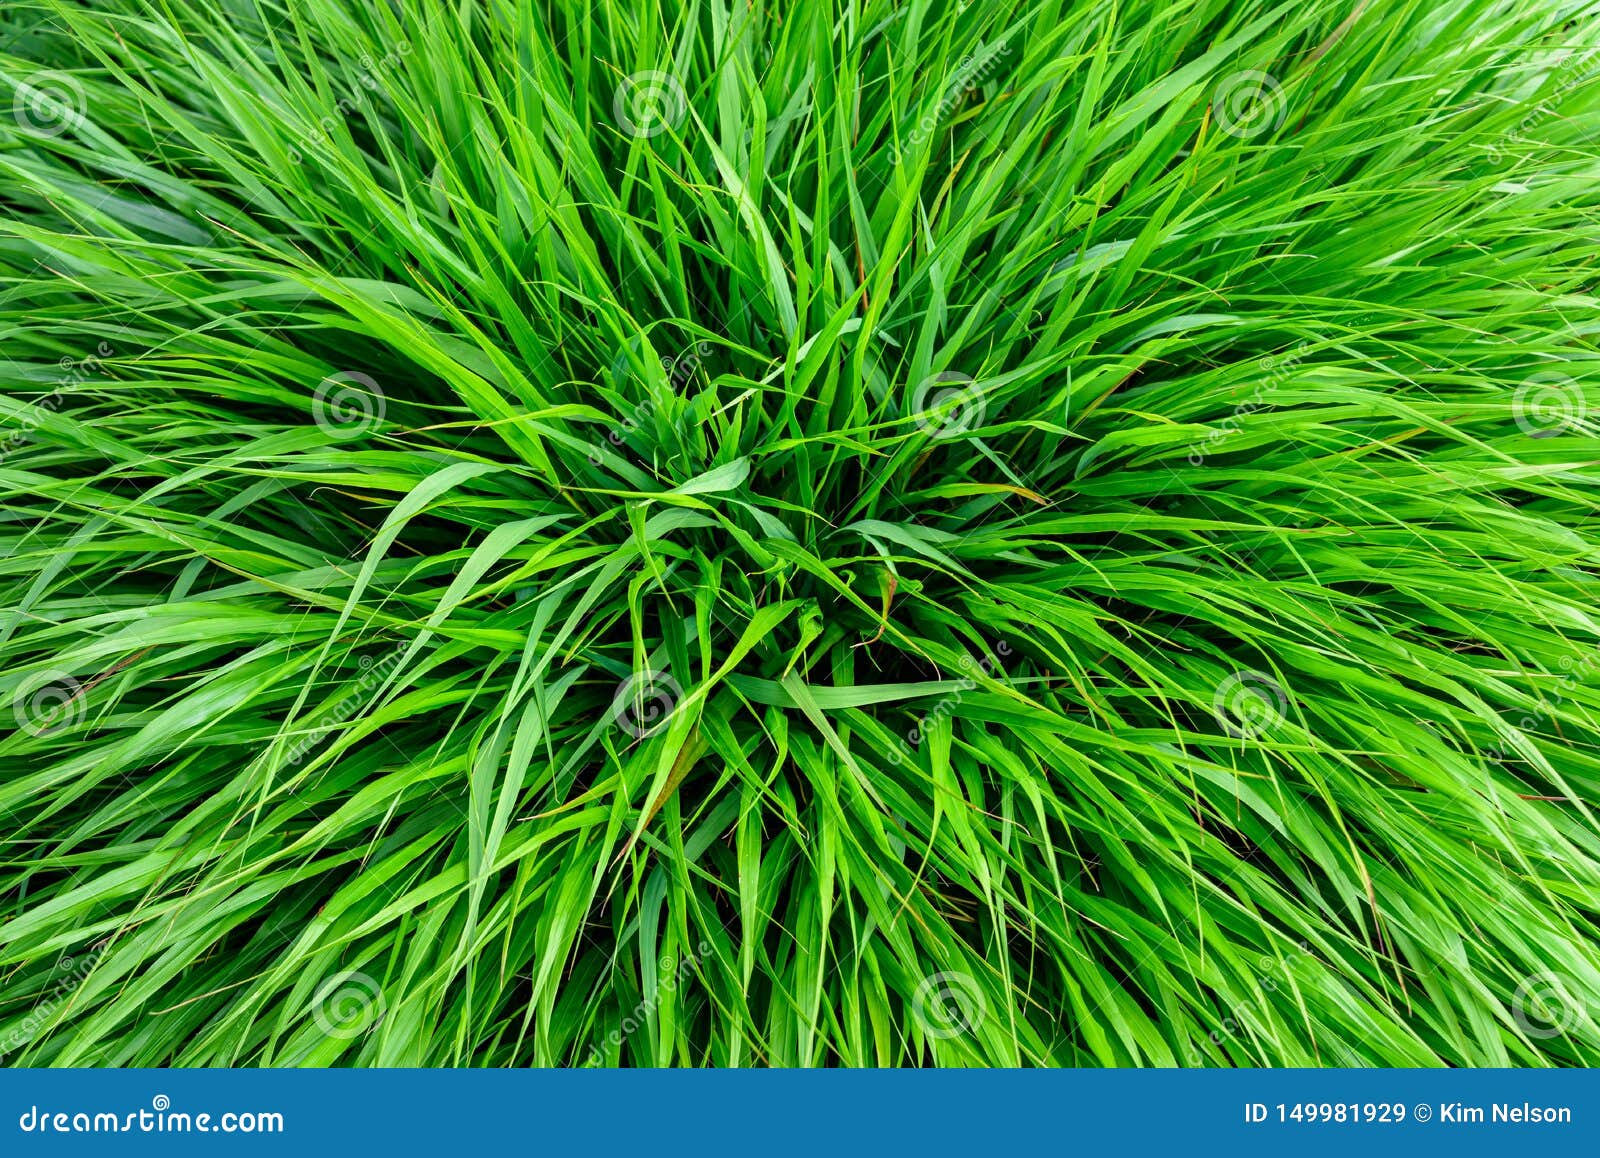 Peaceful Texture Of Green Japanese Forest Grass As A Natural Background